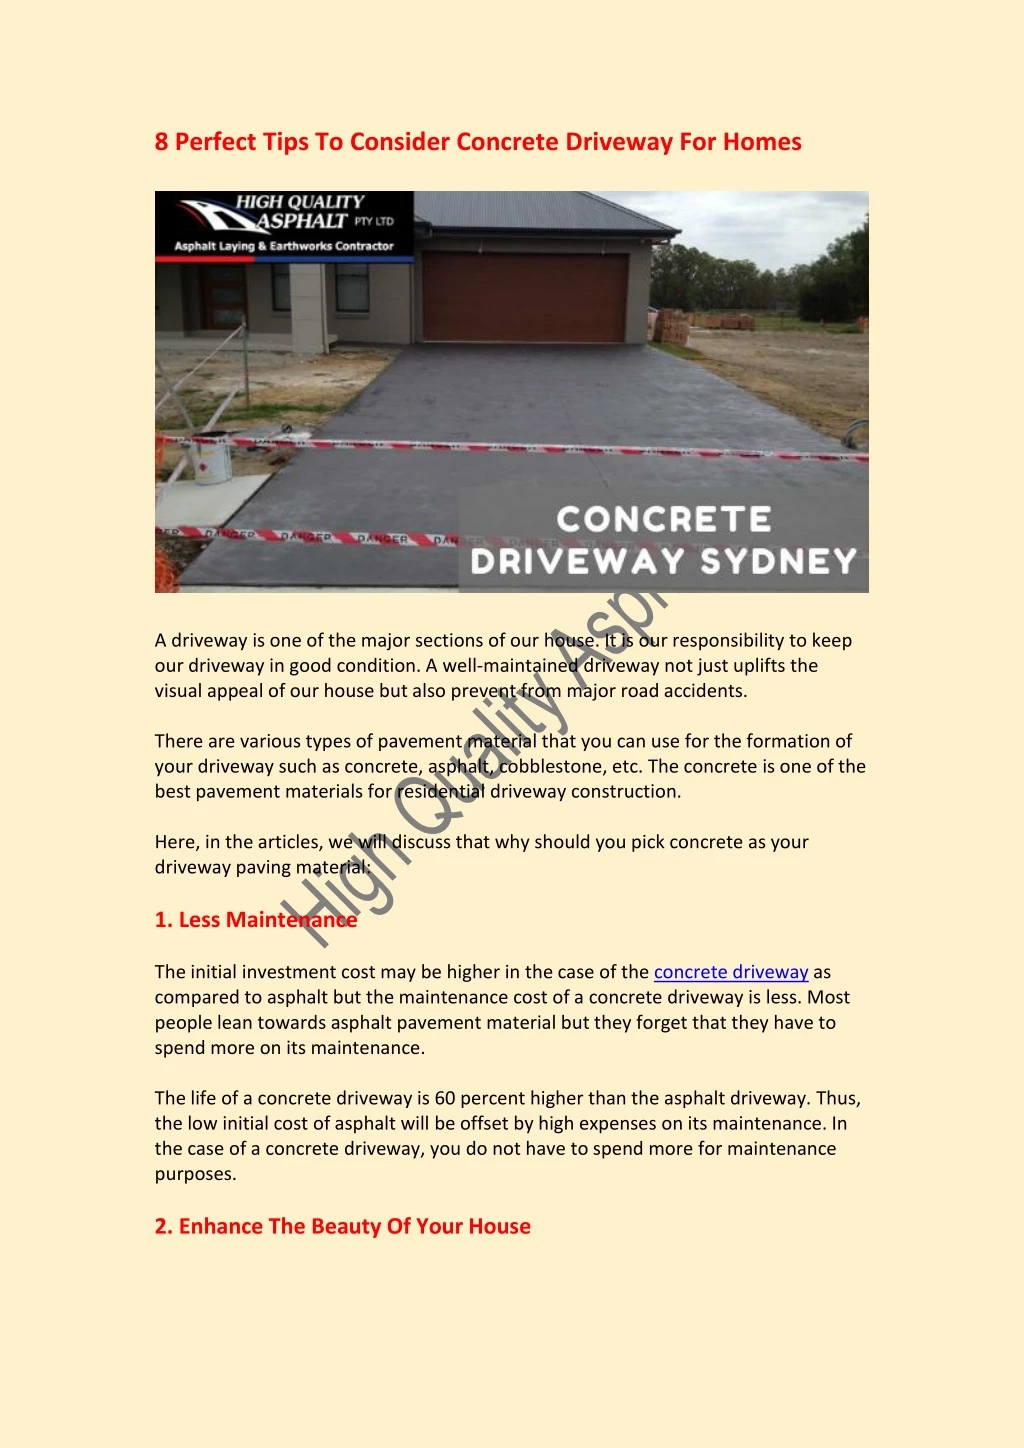 8 perfect tips to consider concrete driveway